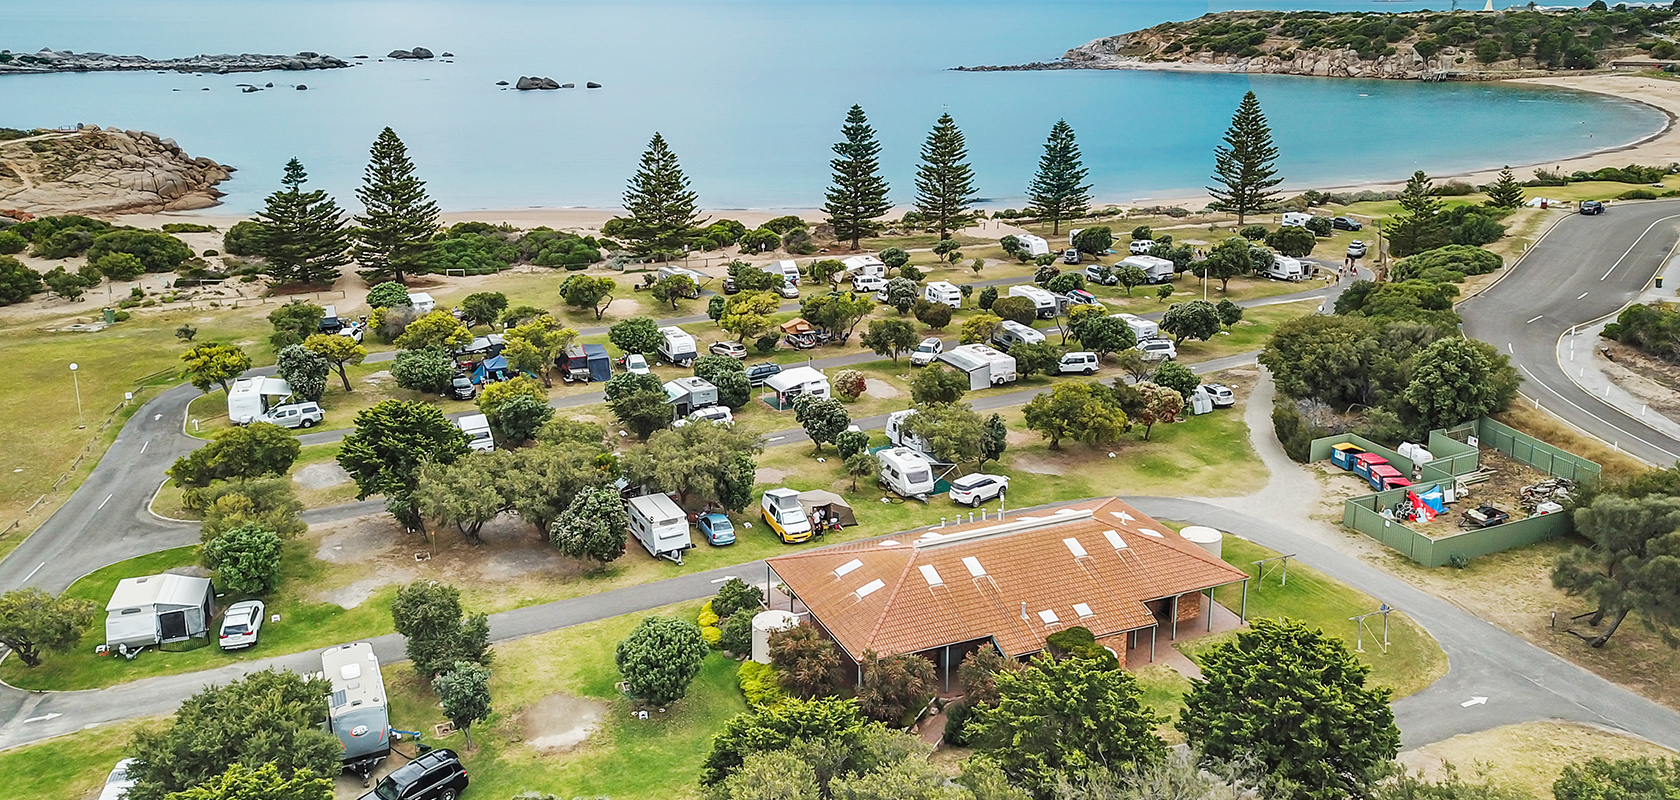 Caravan and camping holiday parks that make a great stay